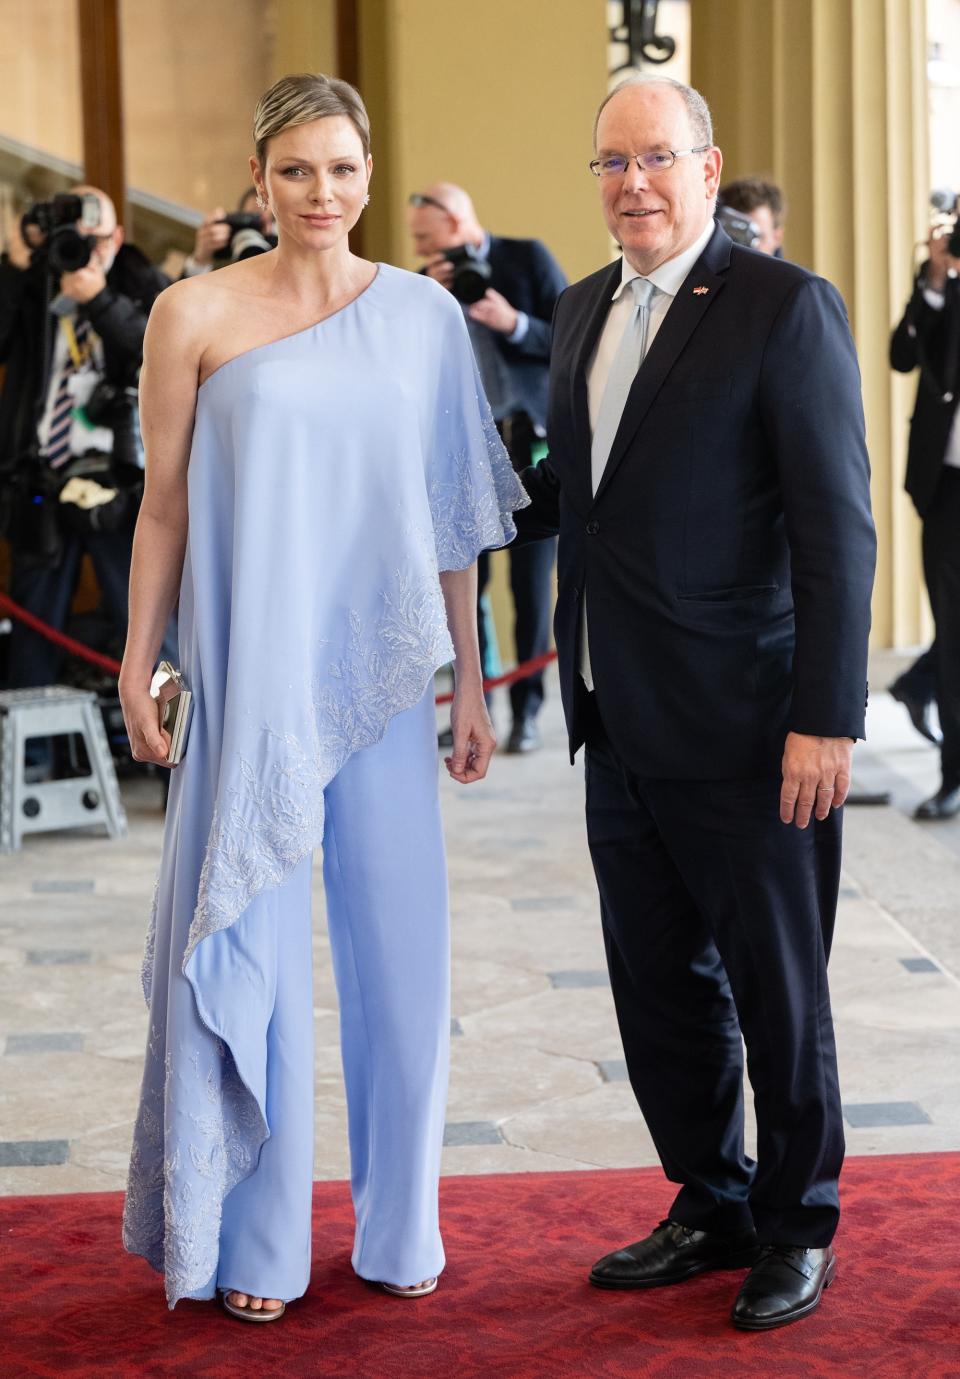 Prince Albert II of Monaco and Princess Charlene of Monaco attend a coronation reception at Buckingham Palace in May 2023.